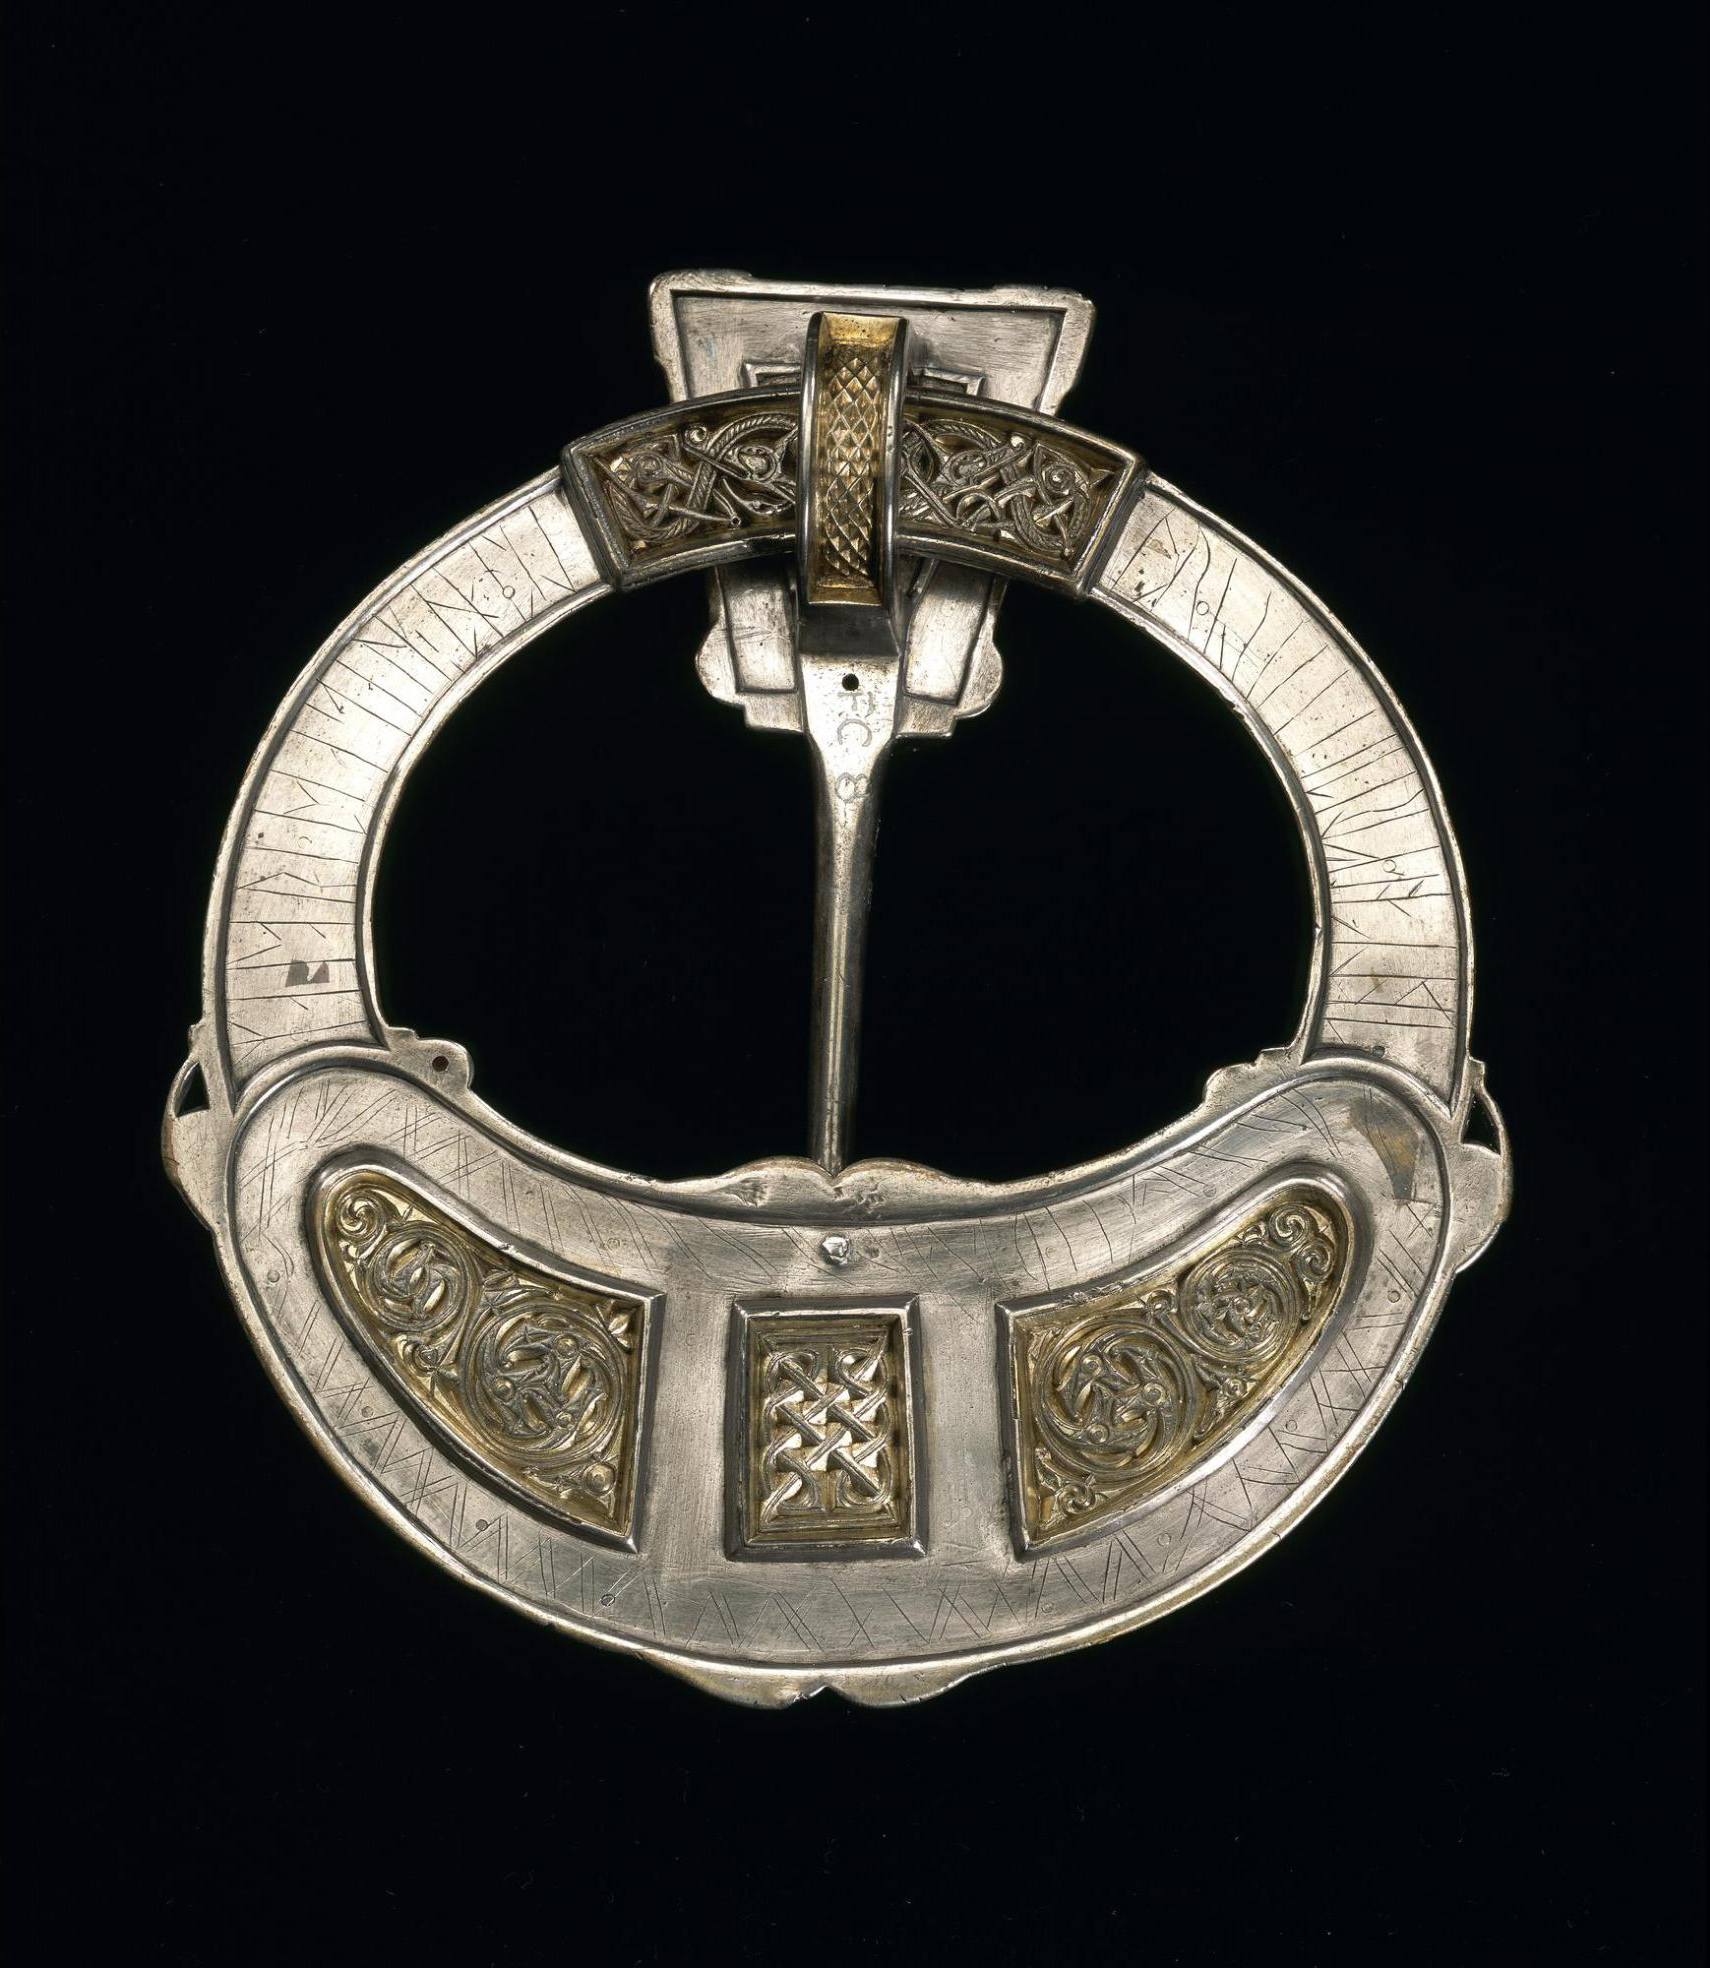 Hunterston Brooch, an early Christian brooch with panels of gold filigree in Celtic and Anglo-Saxon styles, from Ireland or the West of Scotland, c. 700 AD